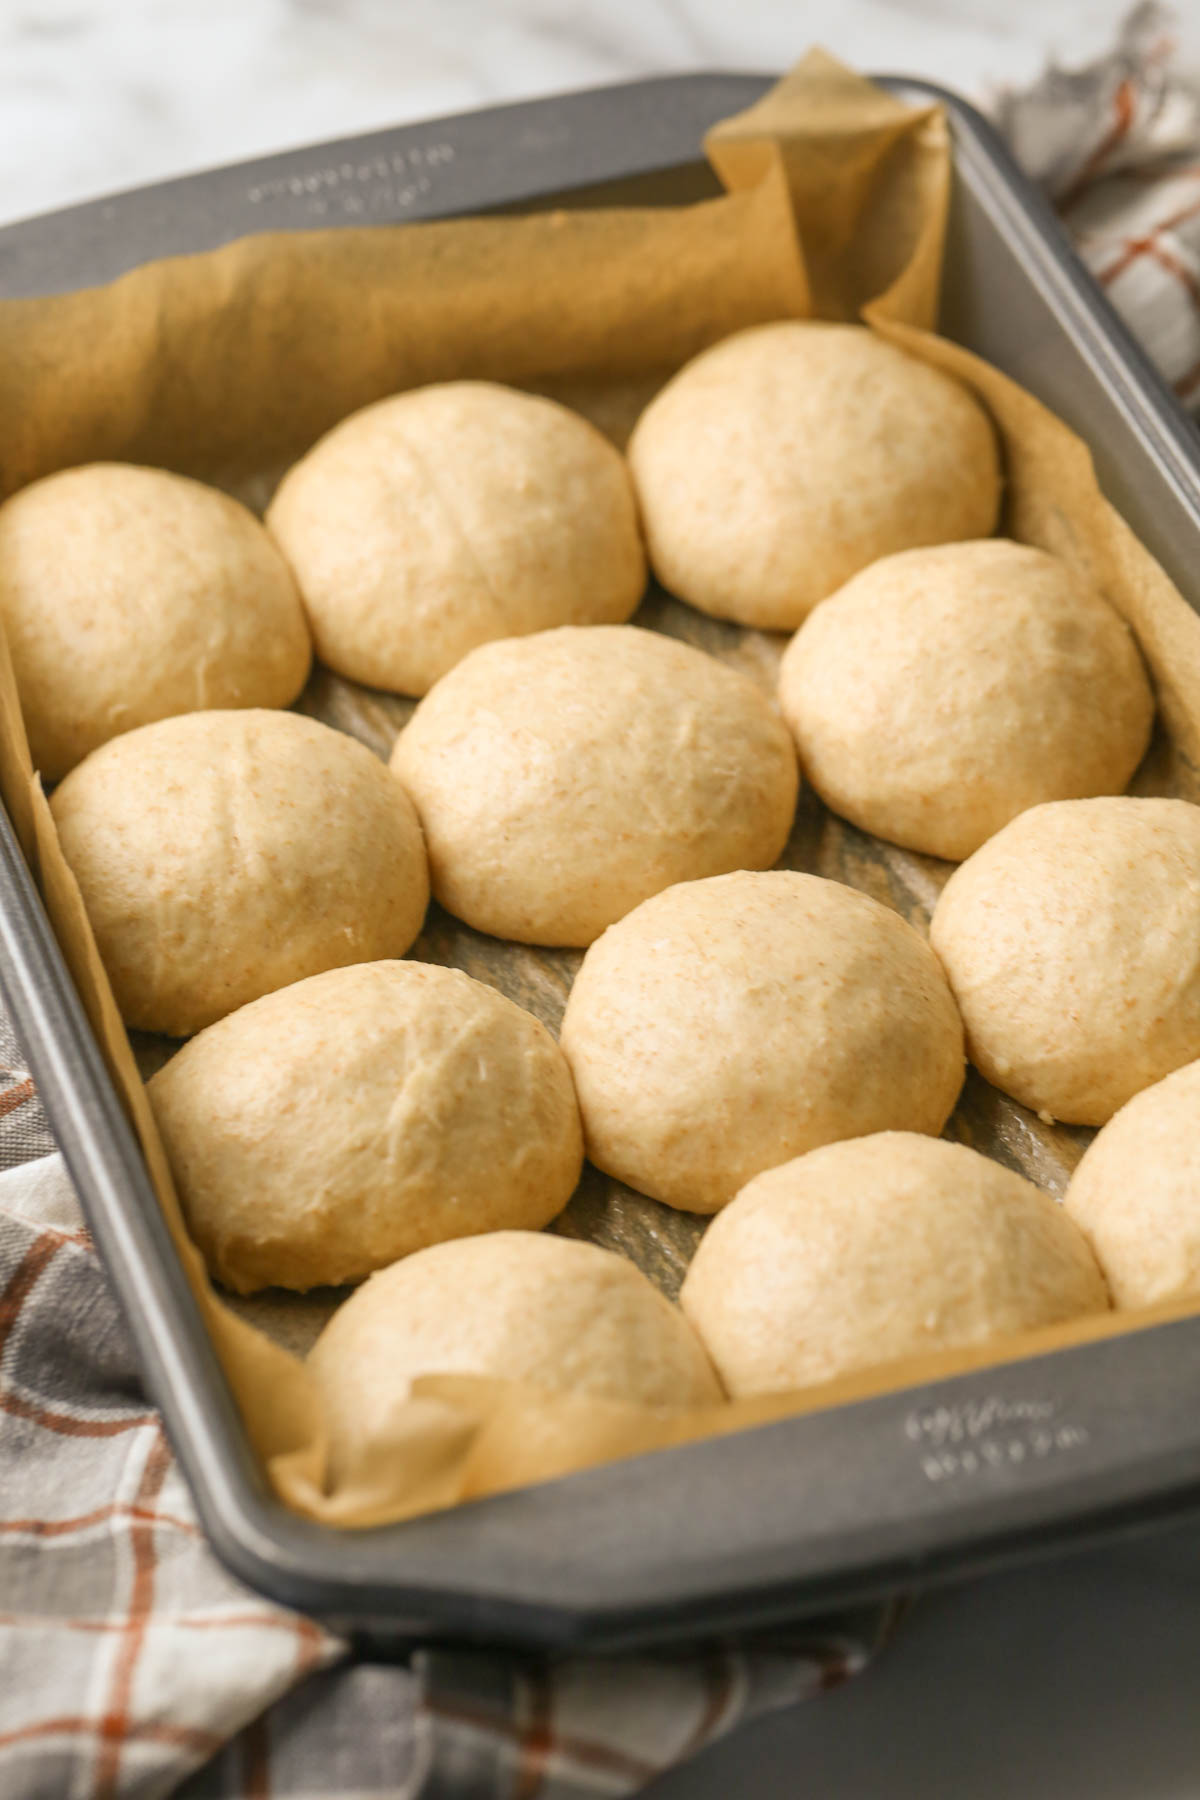 A baking dish lined with parchment paper with the dough balls for Overnight Honey Wheat Rolls after they have risen.  